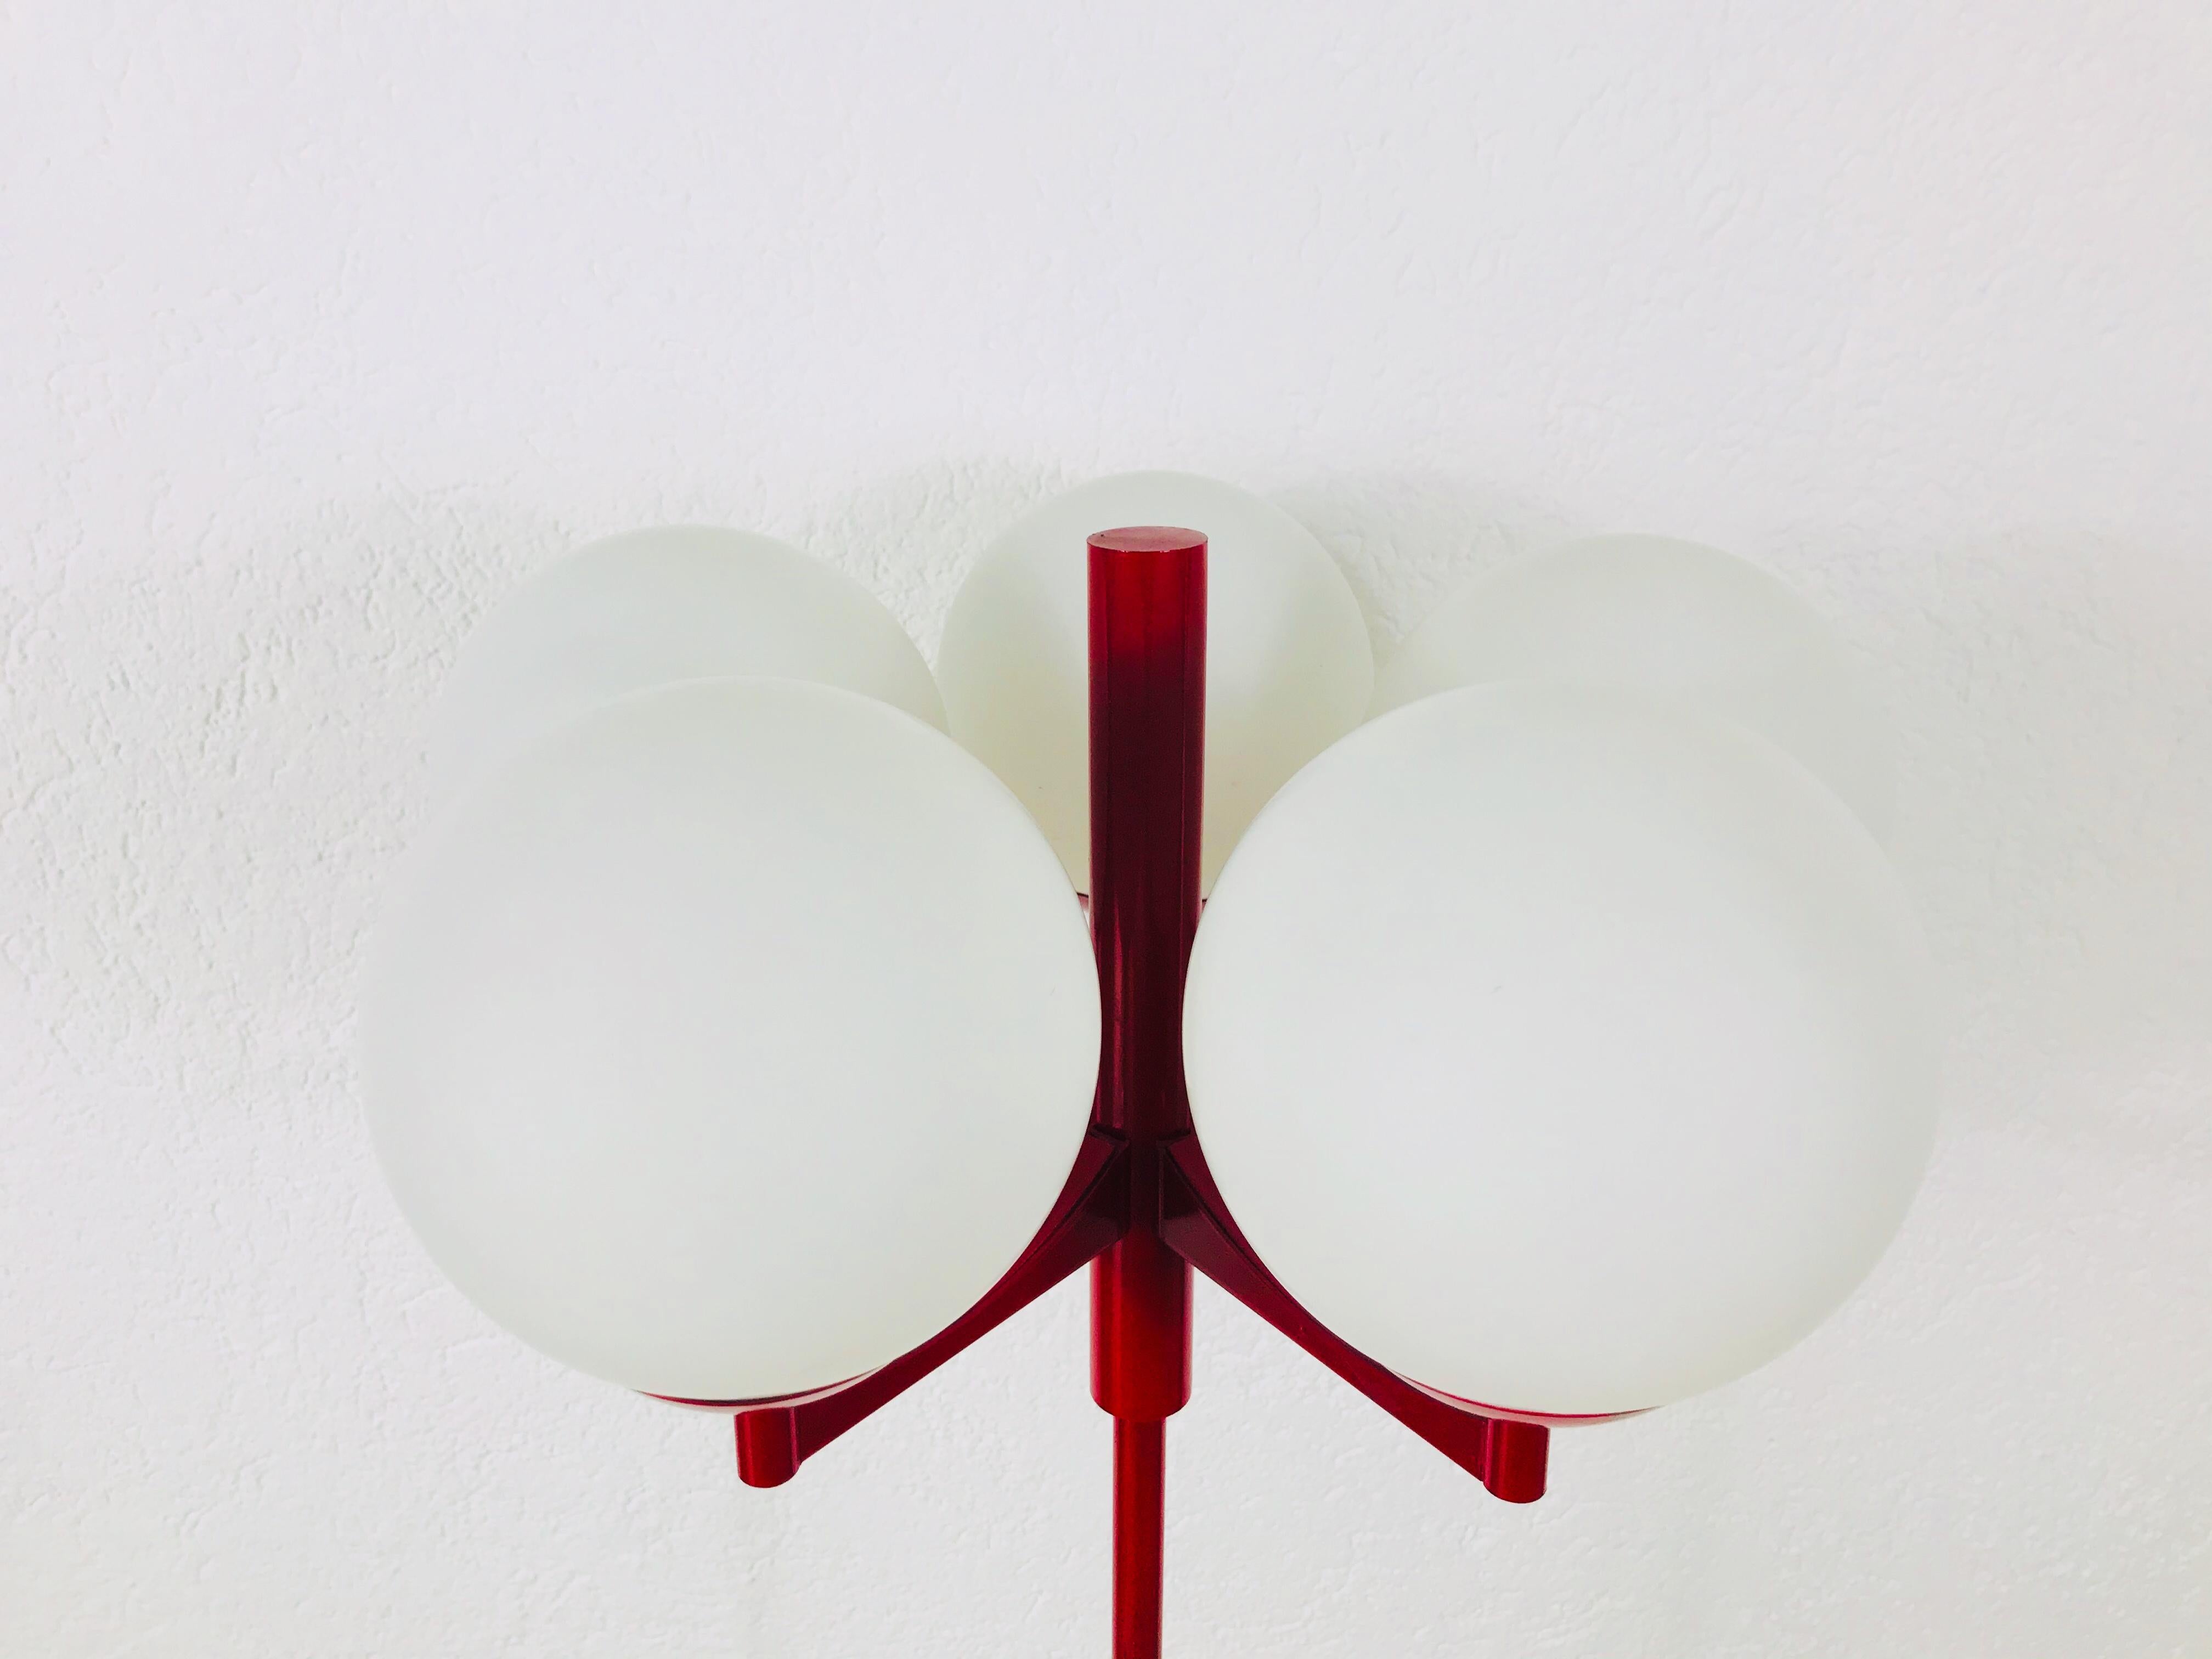 Mid-Century Modern Midcentury Red and White 5-Arm Space Age Floor Lamp Attributed to Kaiser, 1960s For Sale